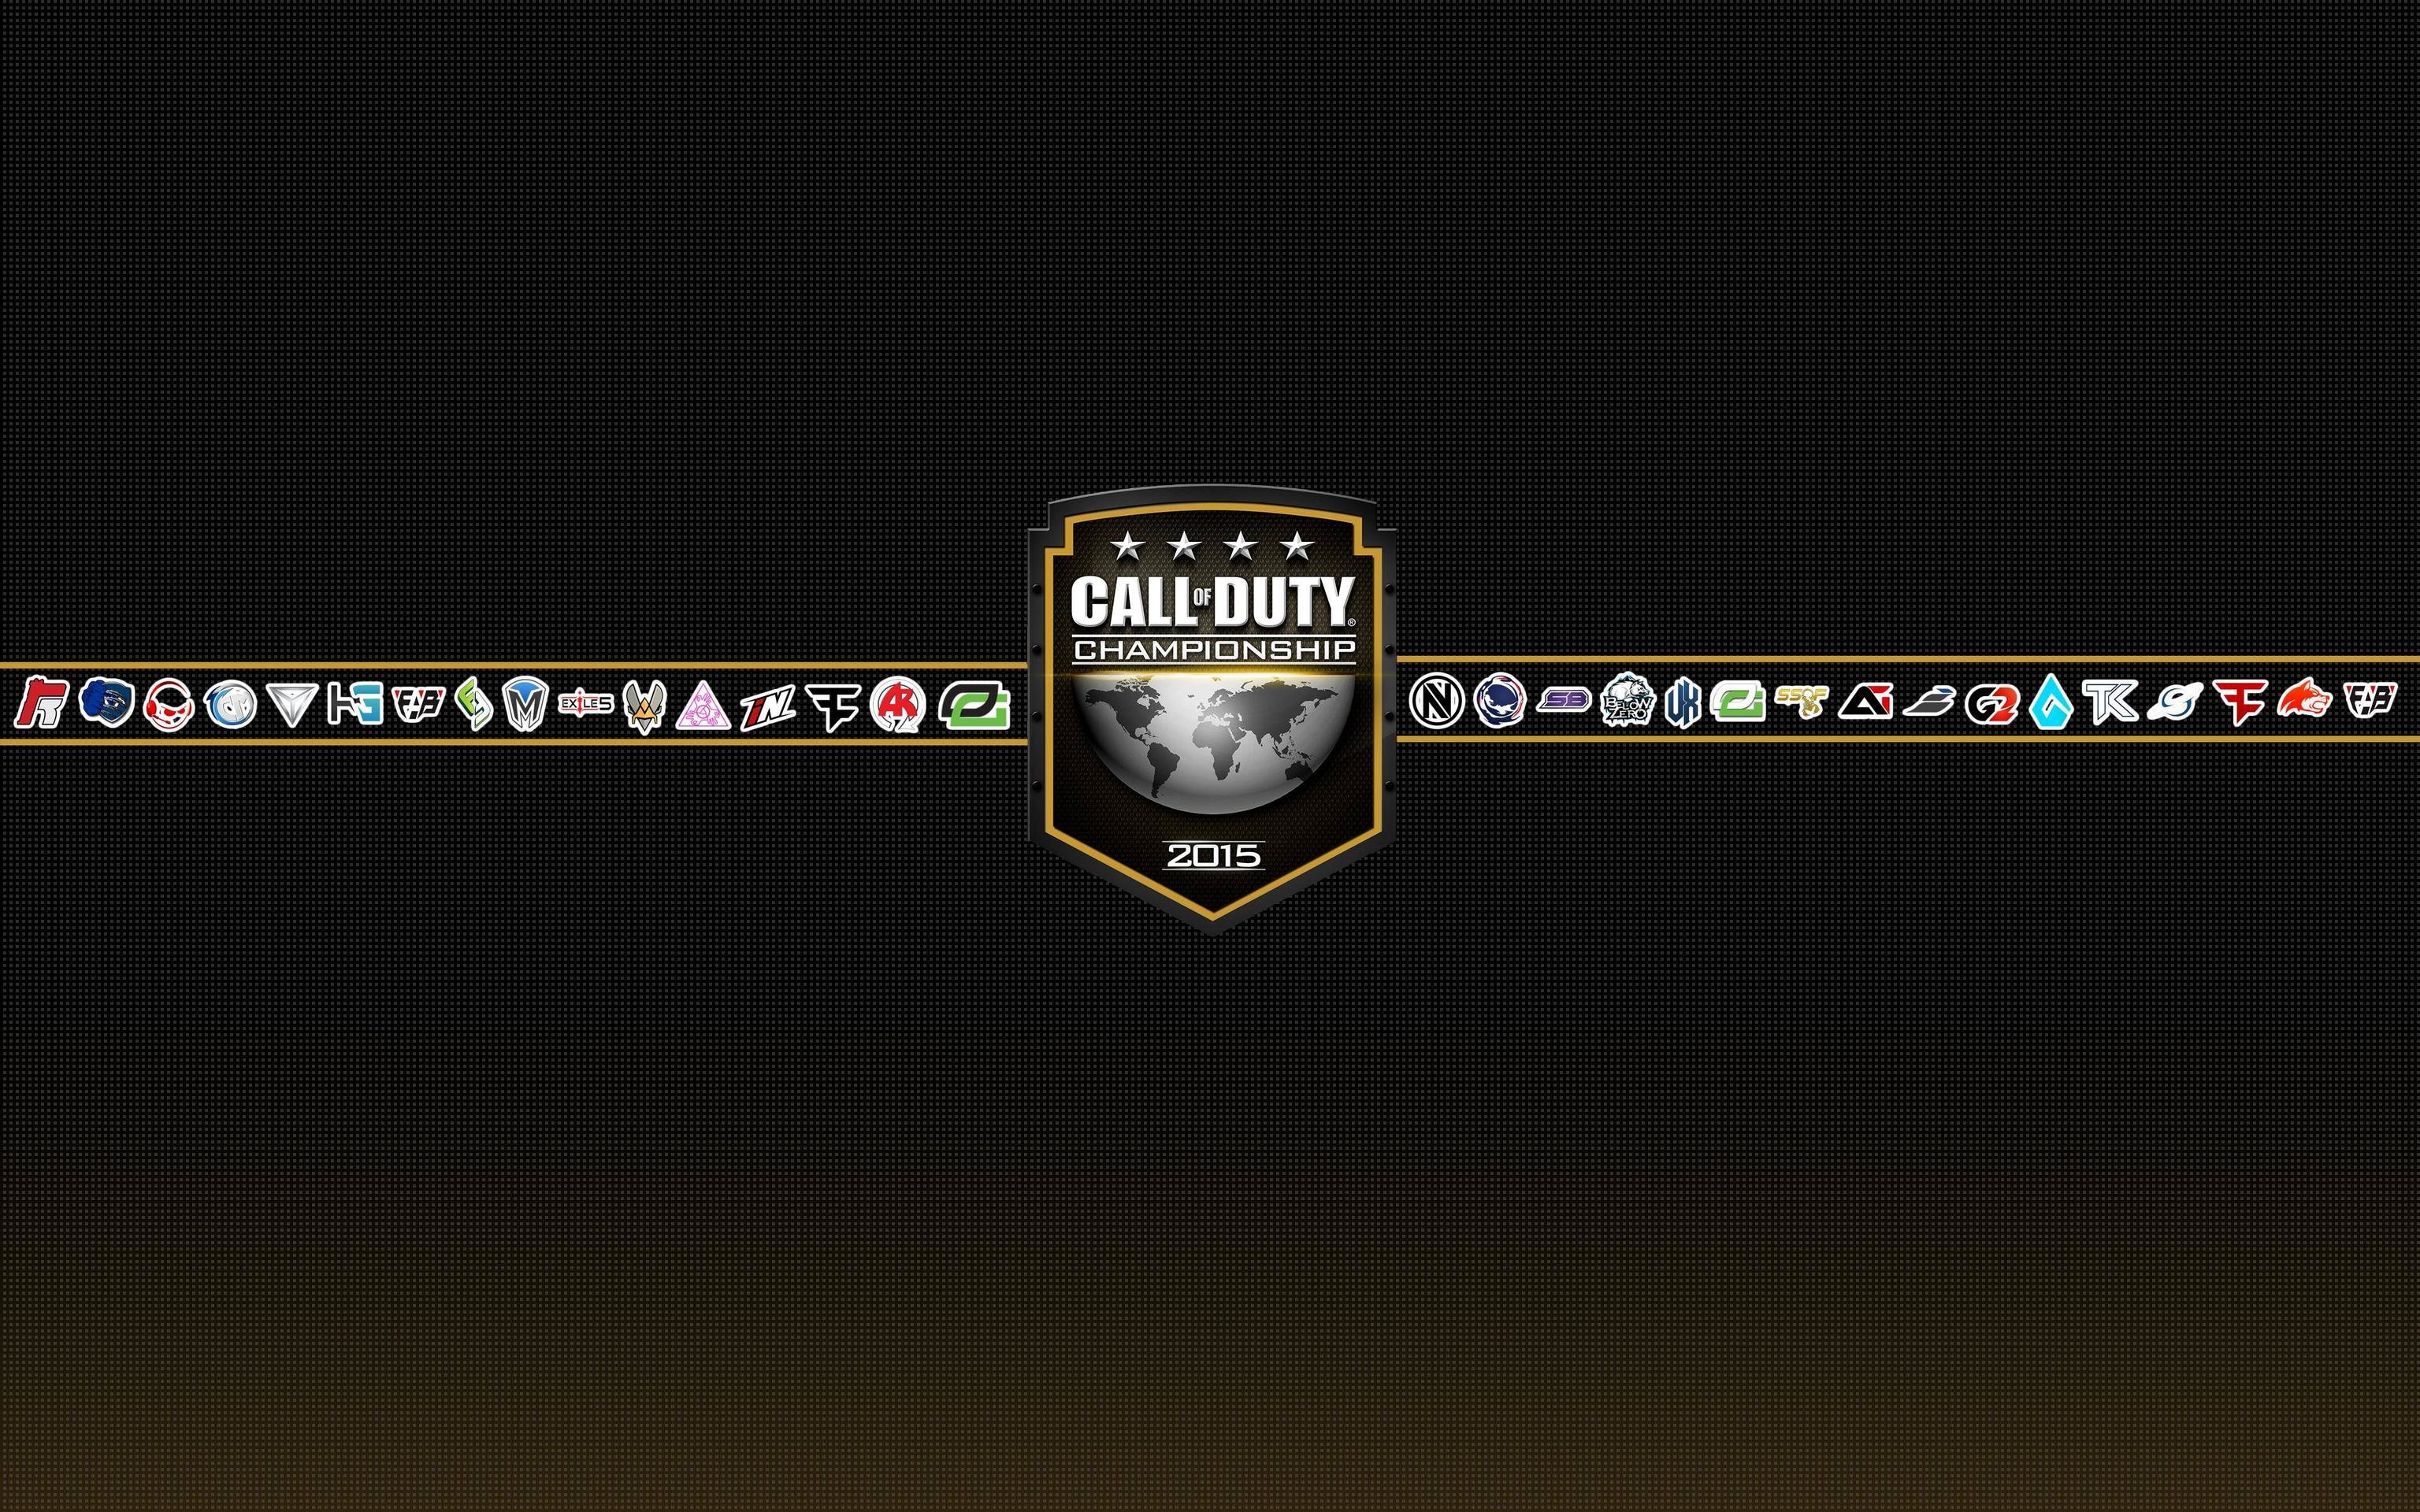 3072x1920, Quick Cod Champs Wallpaper For Y All - Call Of Duty - HD Wallpaper 